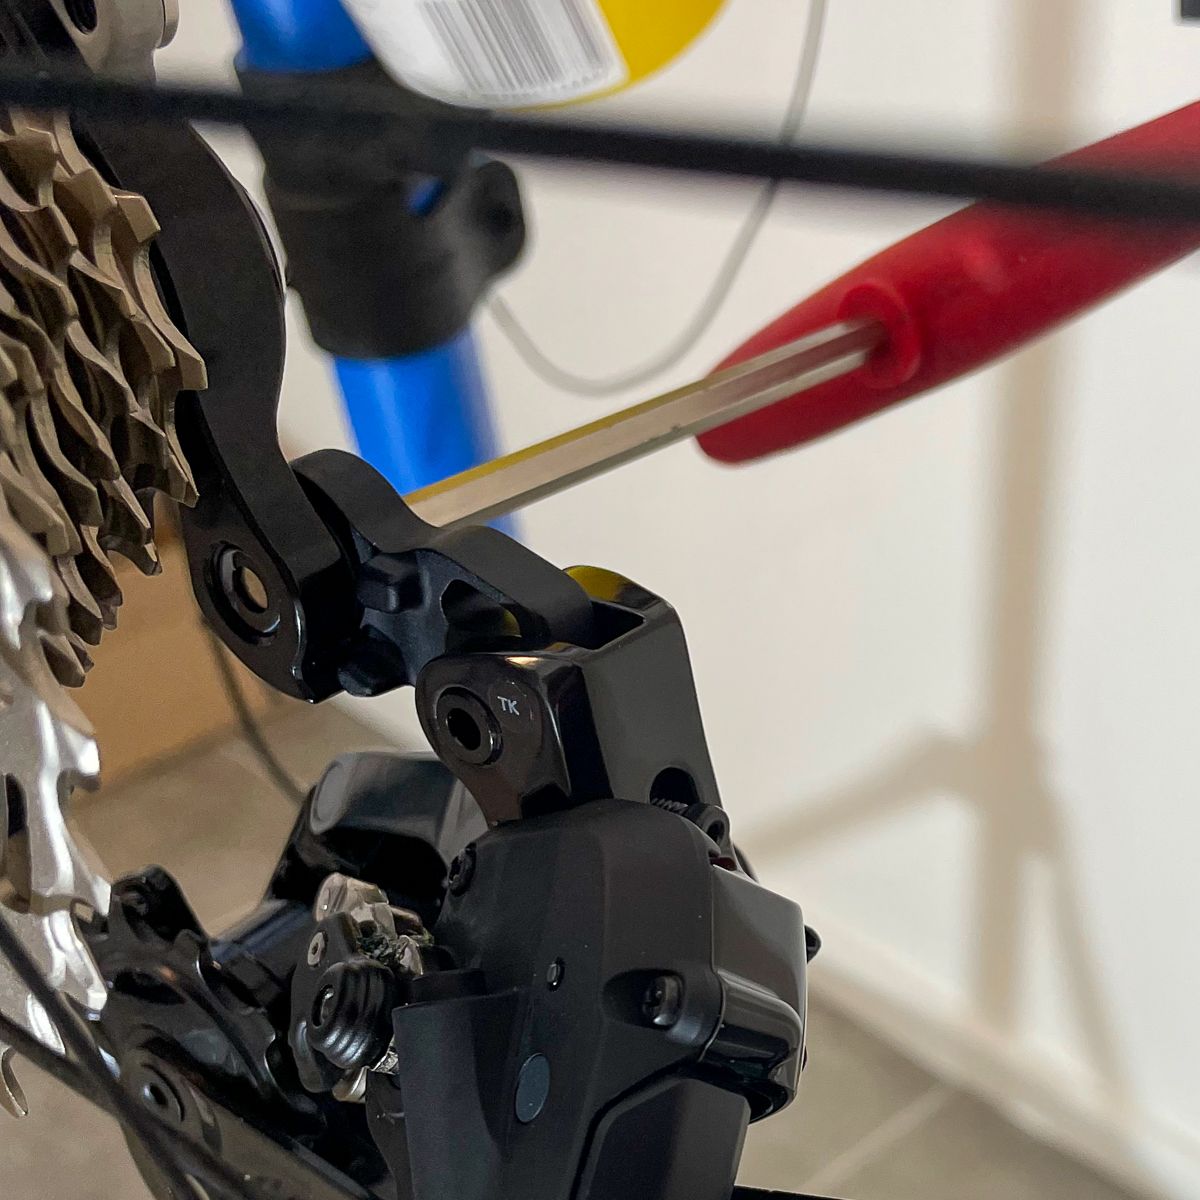 The backside of the derailleur showing the b-tension stop